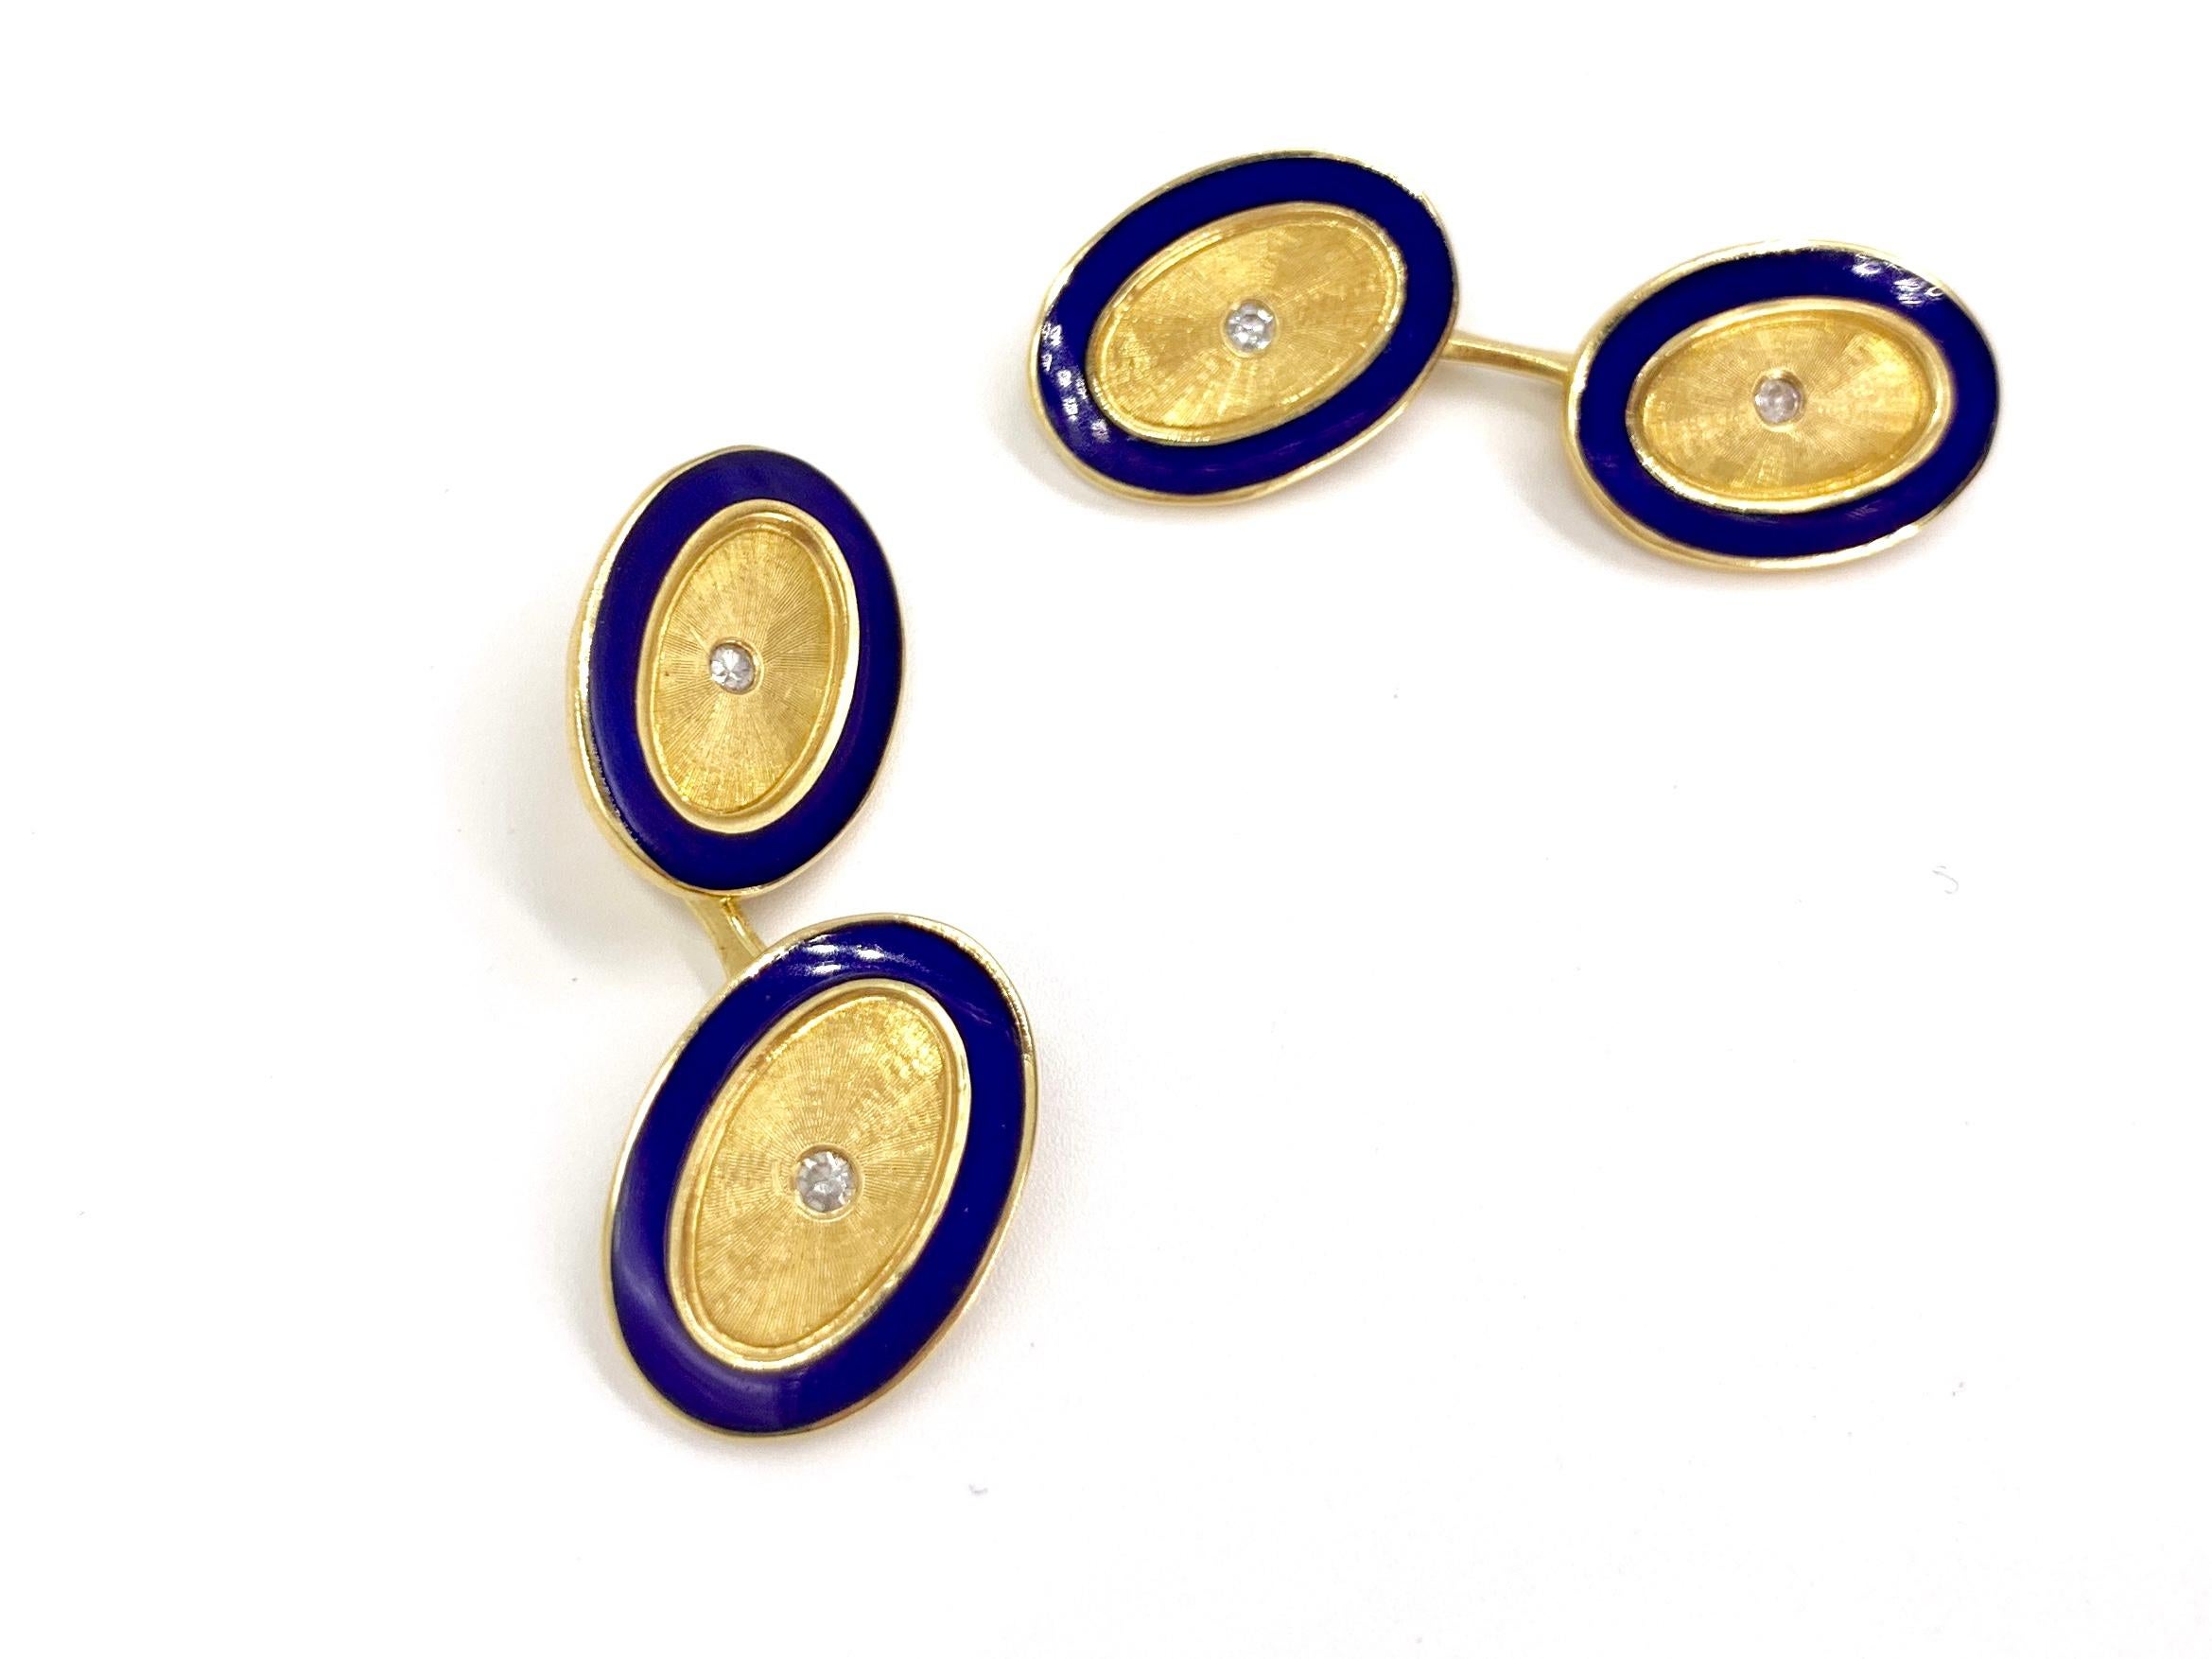 Circa 1970, these classic 18 karat yellow gold oval cuff links feature a vivid cobalt blue enamel edge, hand engraved etching and an understated single bezel burnished round diamond in the center of each link. Links are stamped 750. Front of cuff